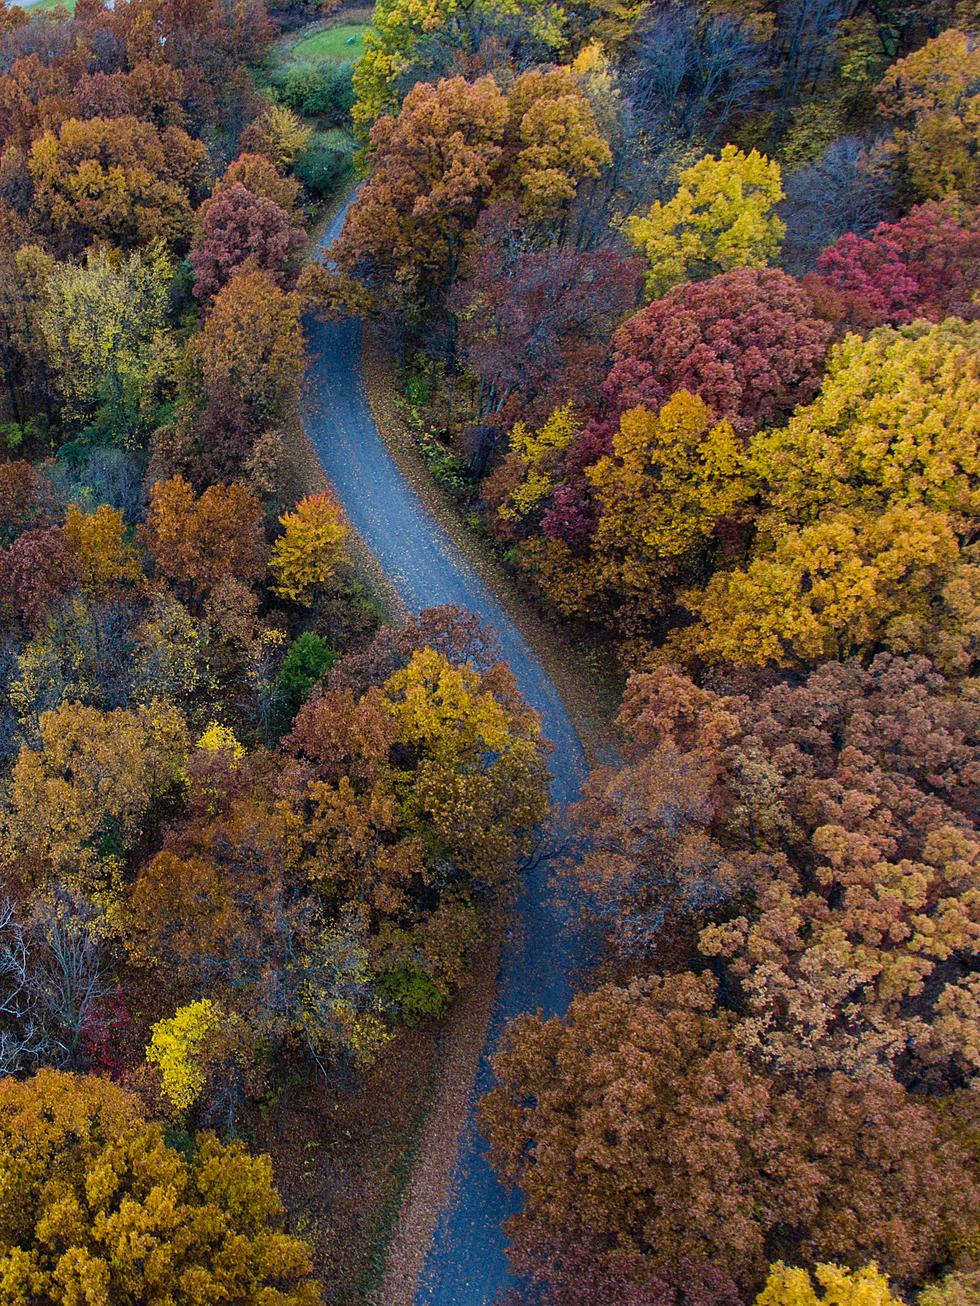 Take A Beautiful Autumn Tour of New Jersey and Enjoy Virtual Leaf Peeping